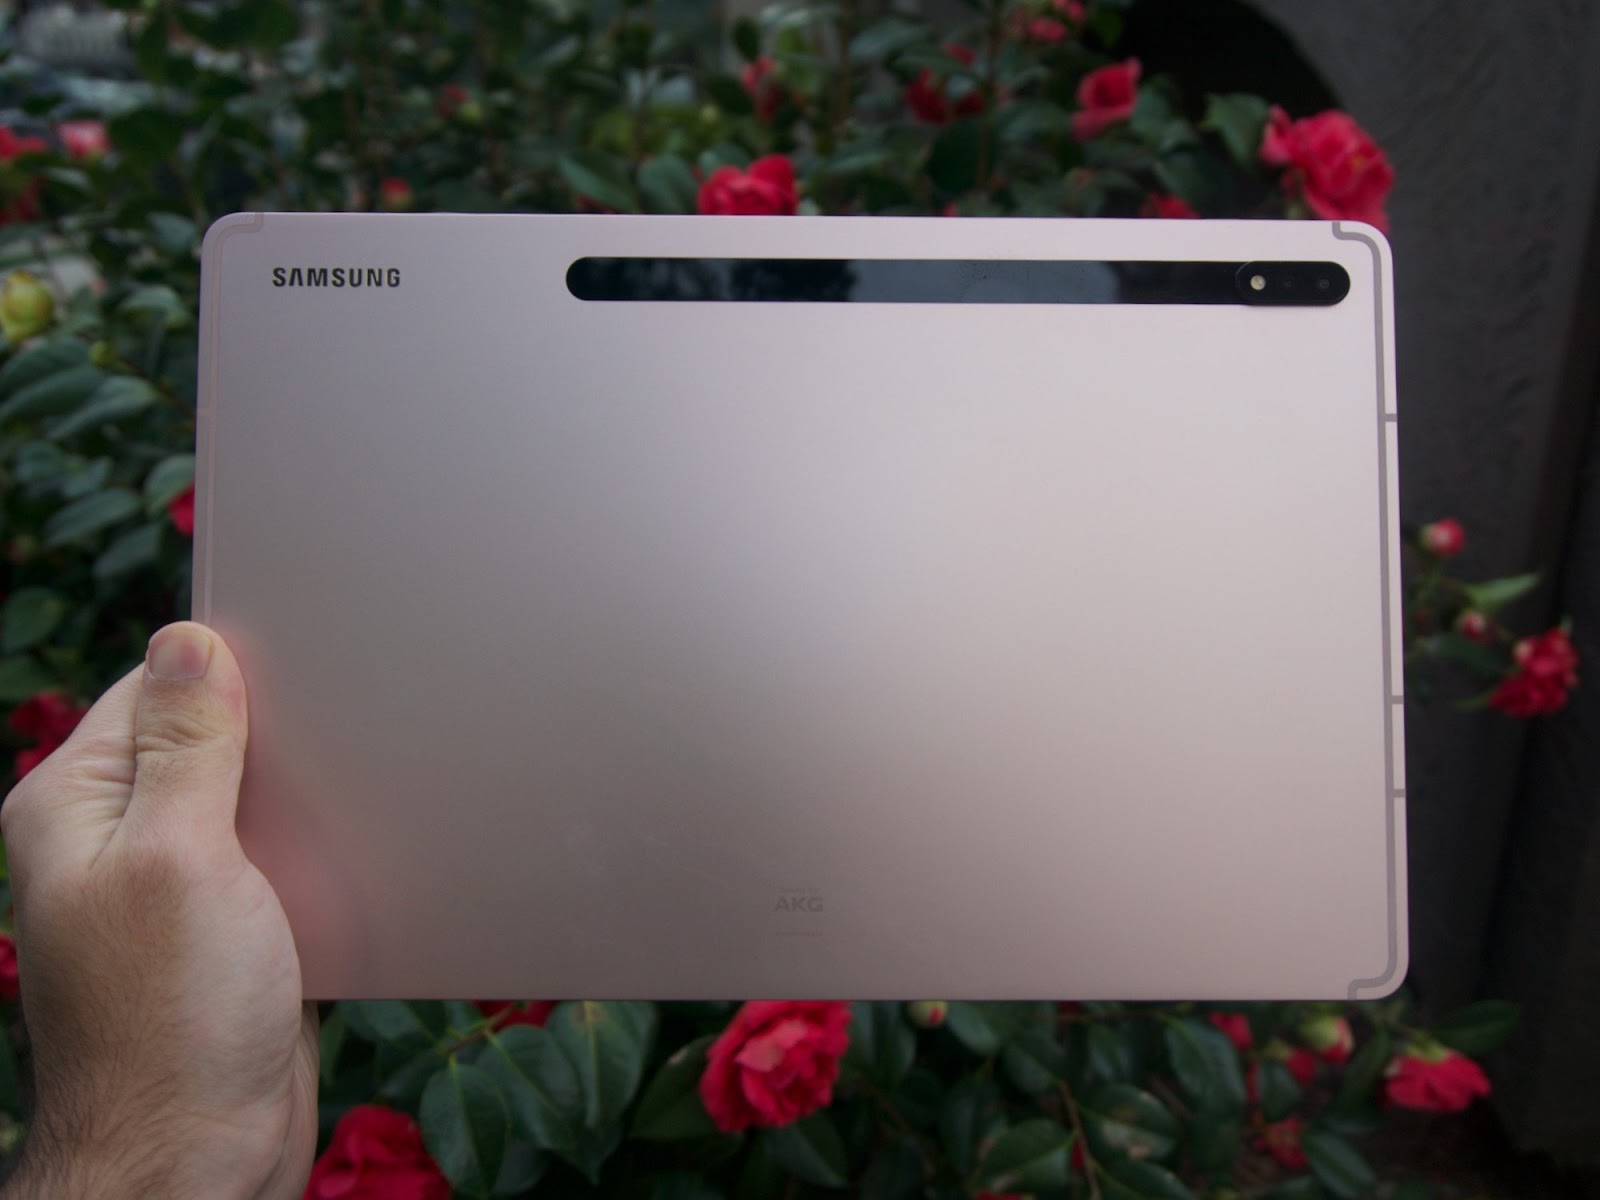 This image shows the backside of the Samsung Galaxy Tab S8+.